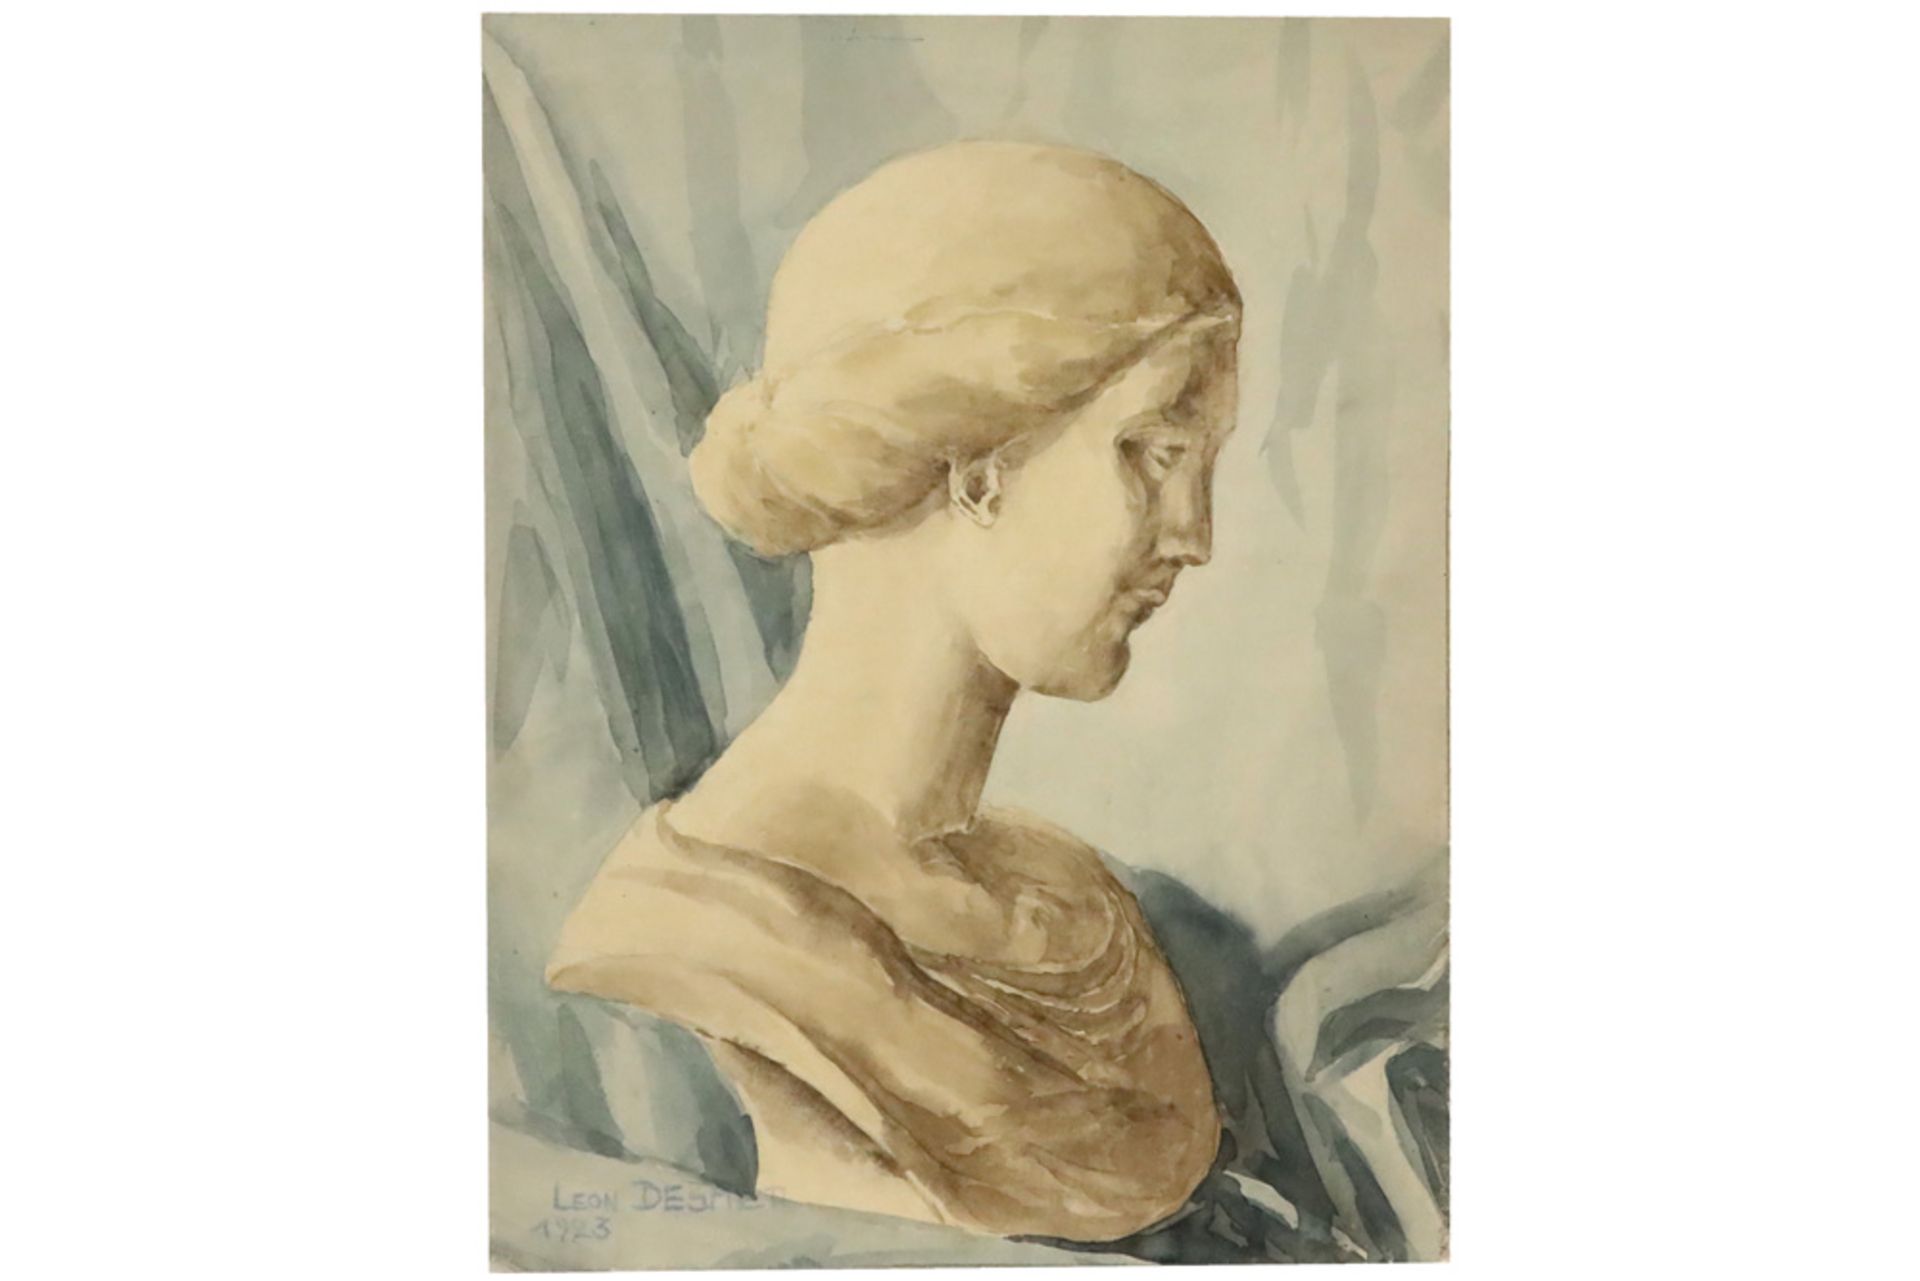 20th Cent. aquarelle - signed / attributed to Leon De Smet and dated 1923 || DE SMET LEON (1881 -